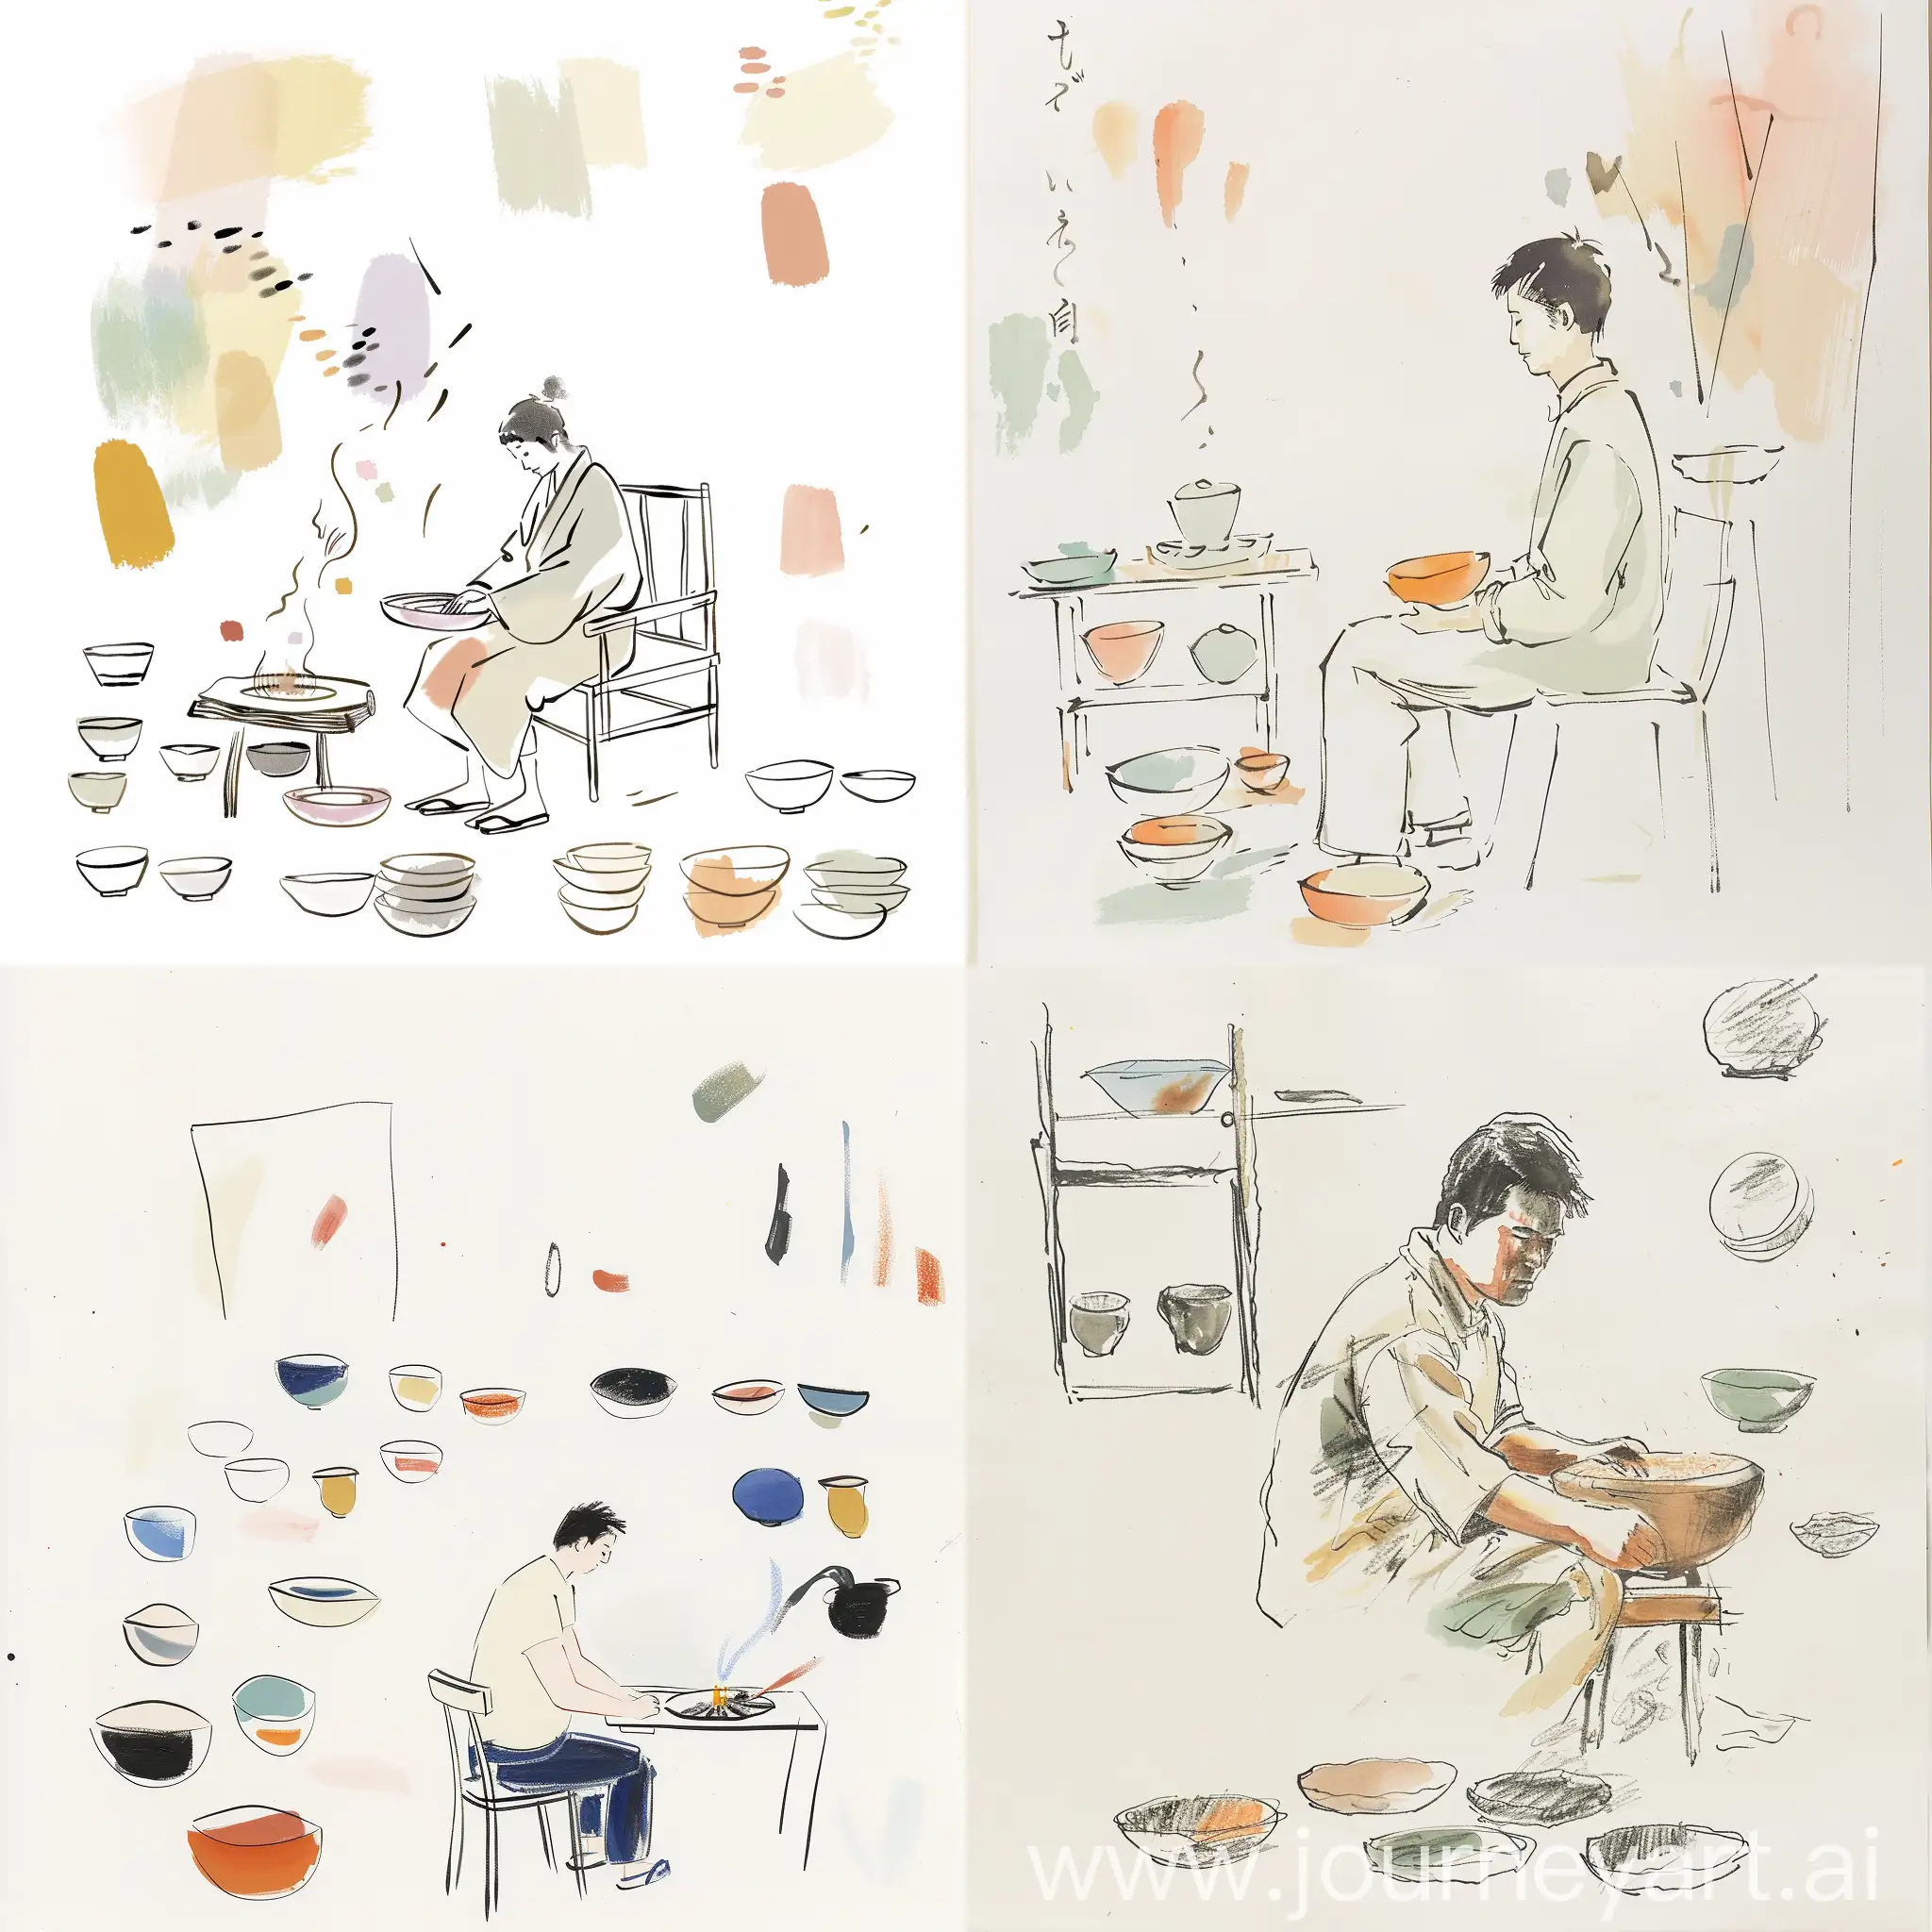 A simple sketch of a  ((Japanese man))(zoom-up)in soft pastel colors on a white background, sitting on a chair and looking intently, making this bowl. A made (charcoal) brazier) and various bowl shapes in the style of bowl works are placed. Various oils and watercolors in Matisse style, a peaceful scene of creative expression. Simple lines and flat colors, single line art illustration, sparse simplicity, Y2K